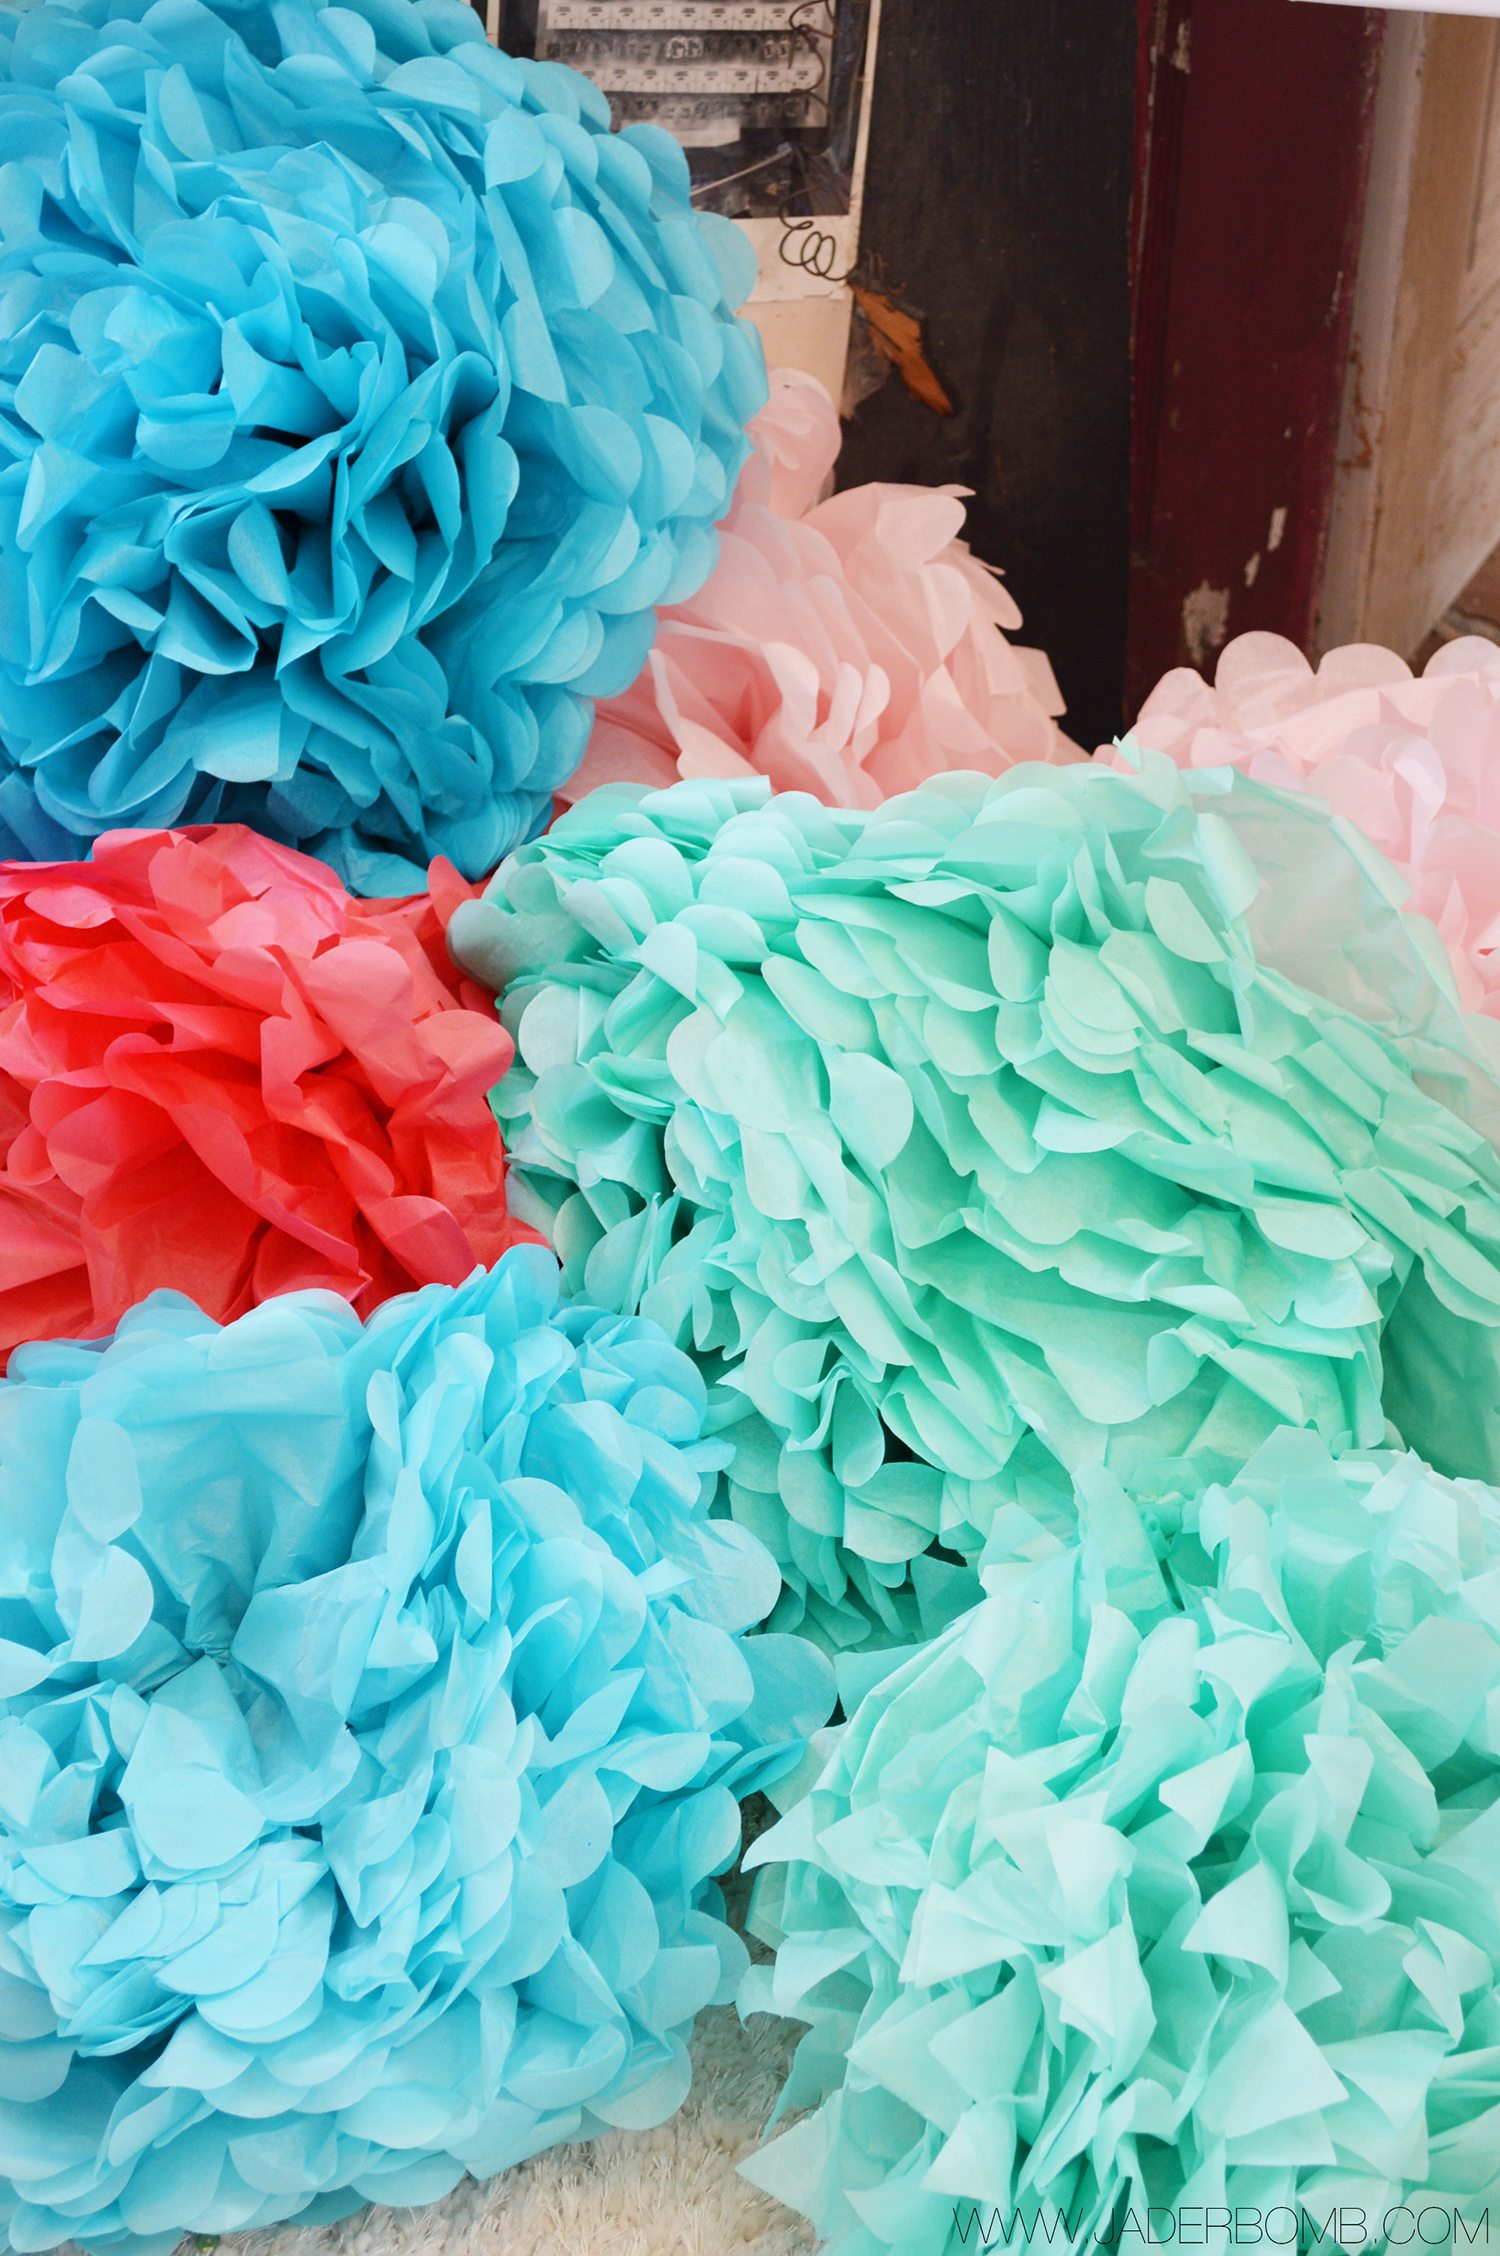 HOW TO MAKE TISSUE FLOWERS